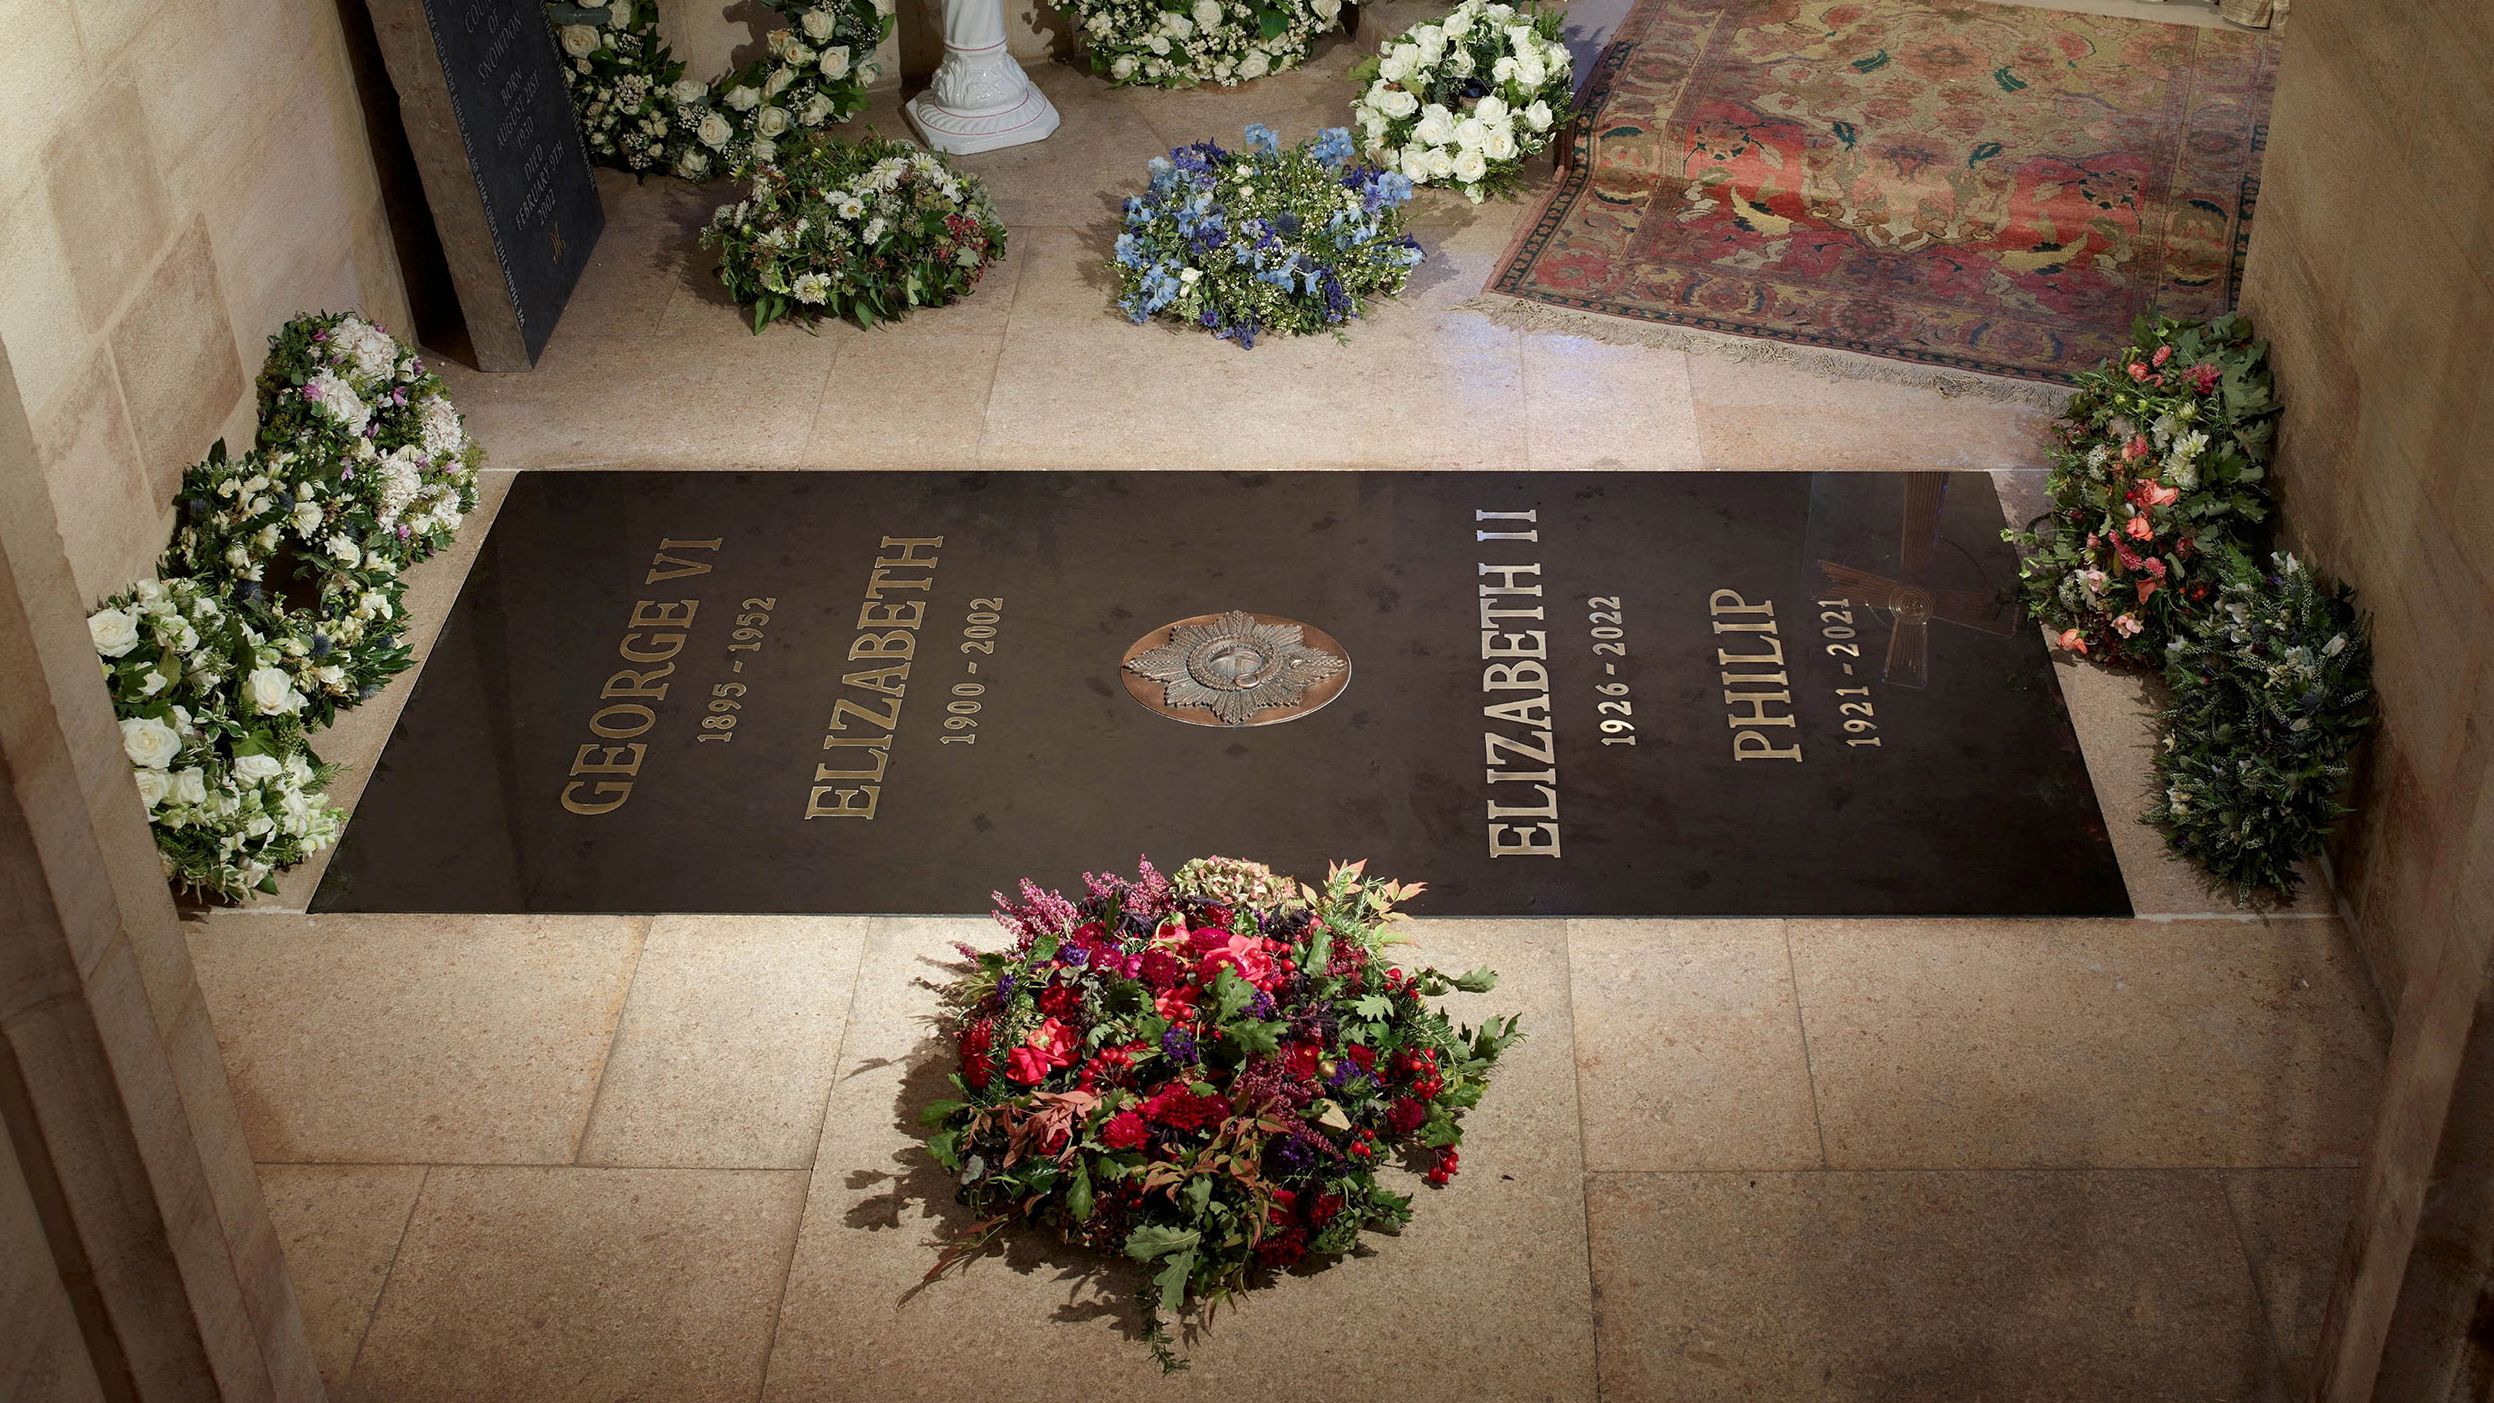 <a href="https://www.cnn.com/2022/09/24/uk/queen-elizabeth-king-george-chapel-photograph-intl-gbr/index.html" target="_blank">The final resting place of Britain's Queen Elizabeth II</a> is seen within St. George's Chapel at Windsor Castle in this undated photo released by Buckingham Palace on Saturday, September 24.